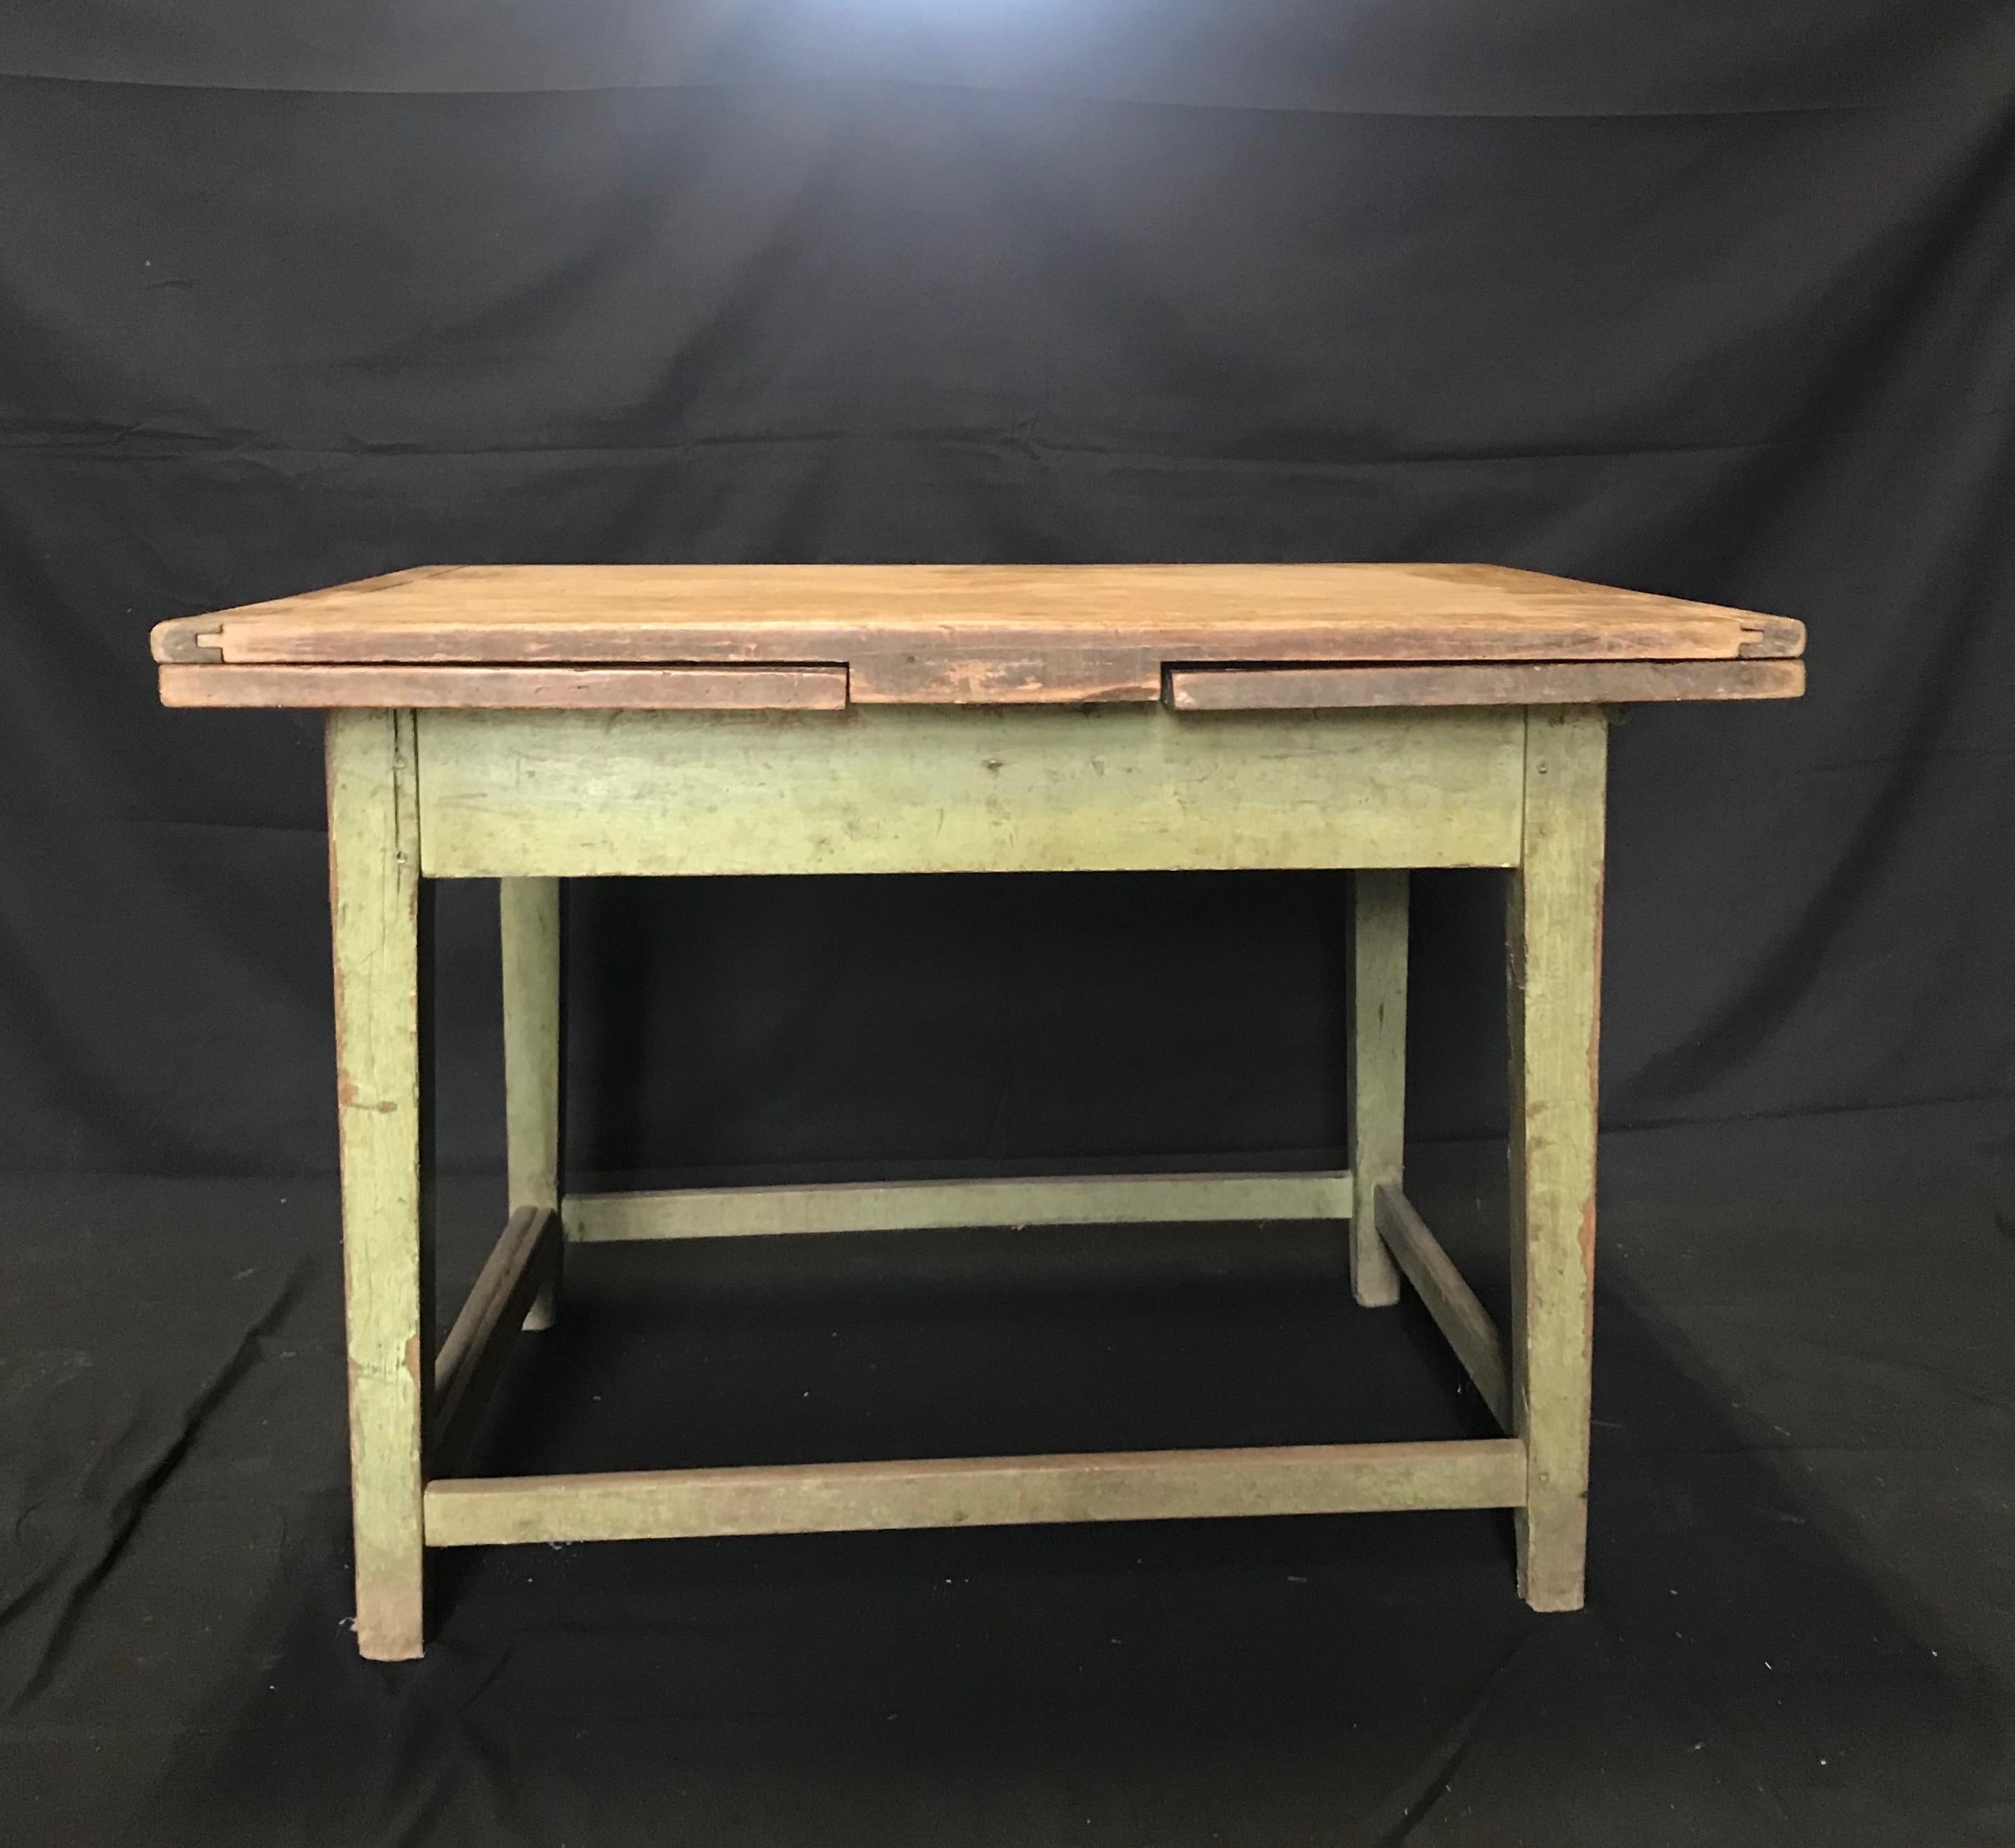 French extendable drop leaf dining table circa 19th century or earlier with original green painted base. Can be three sizes! A very versatile table that takes up very little space, and can be three sizes: the table will extend with both leaves to 6